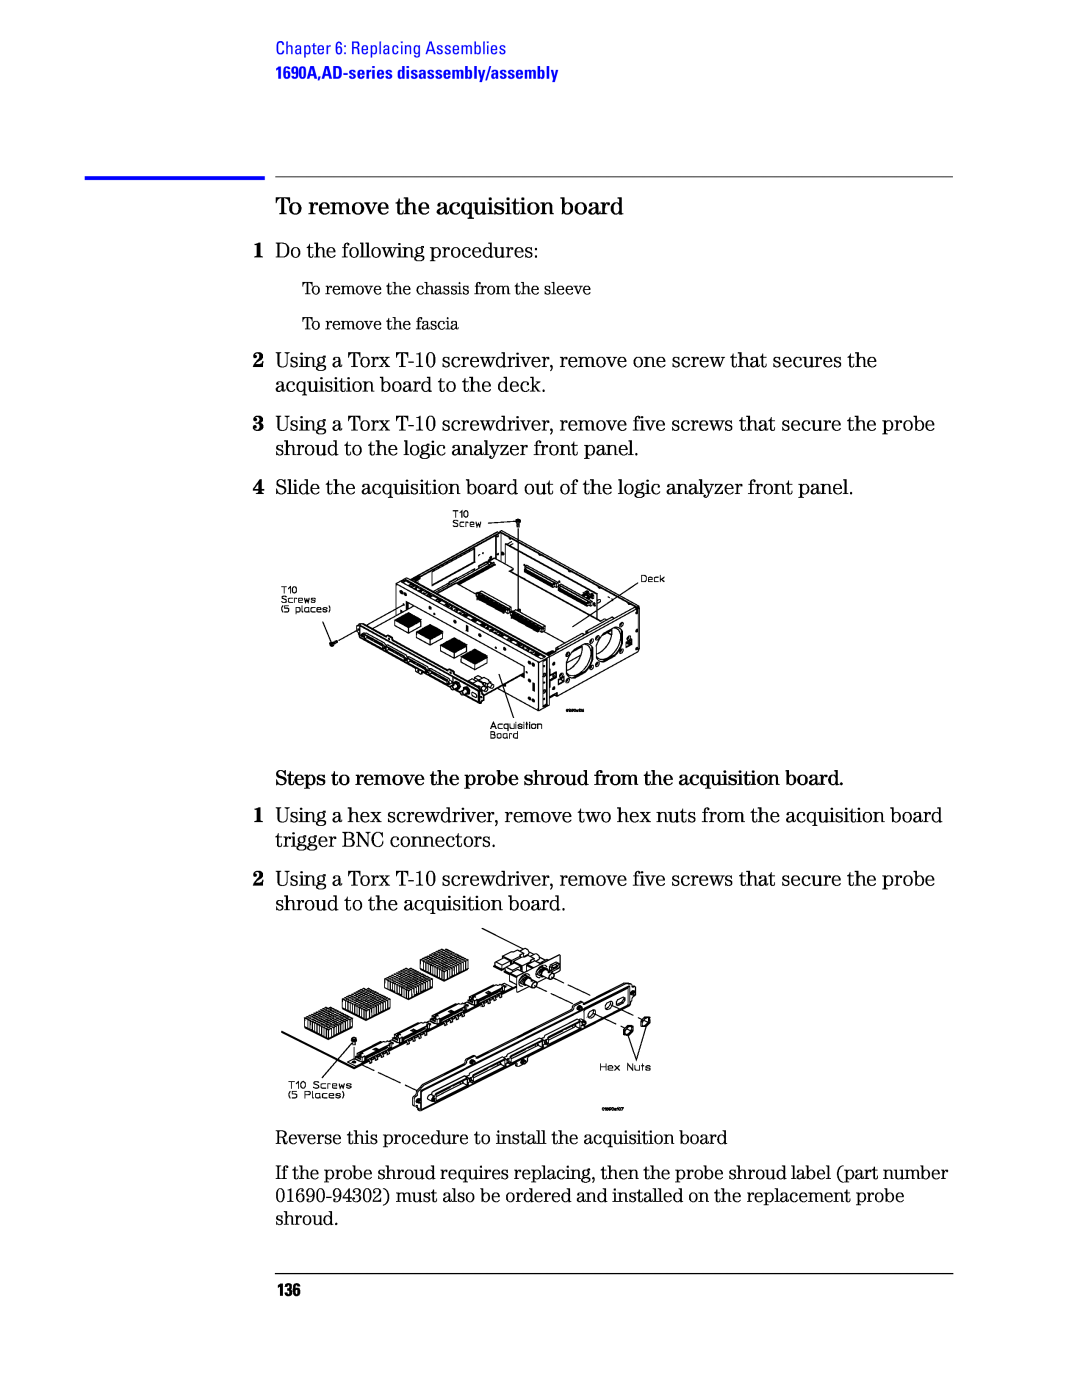 Agilent Technologies 1680, 1690 manual To remove the acquisition board, Do the following procedures 